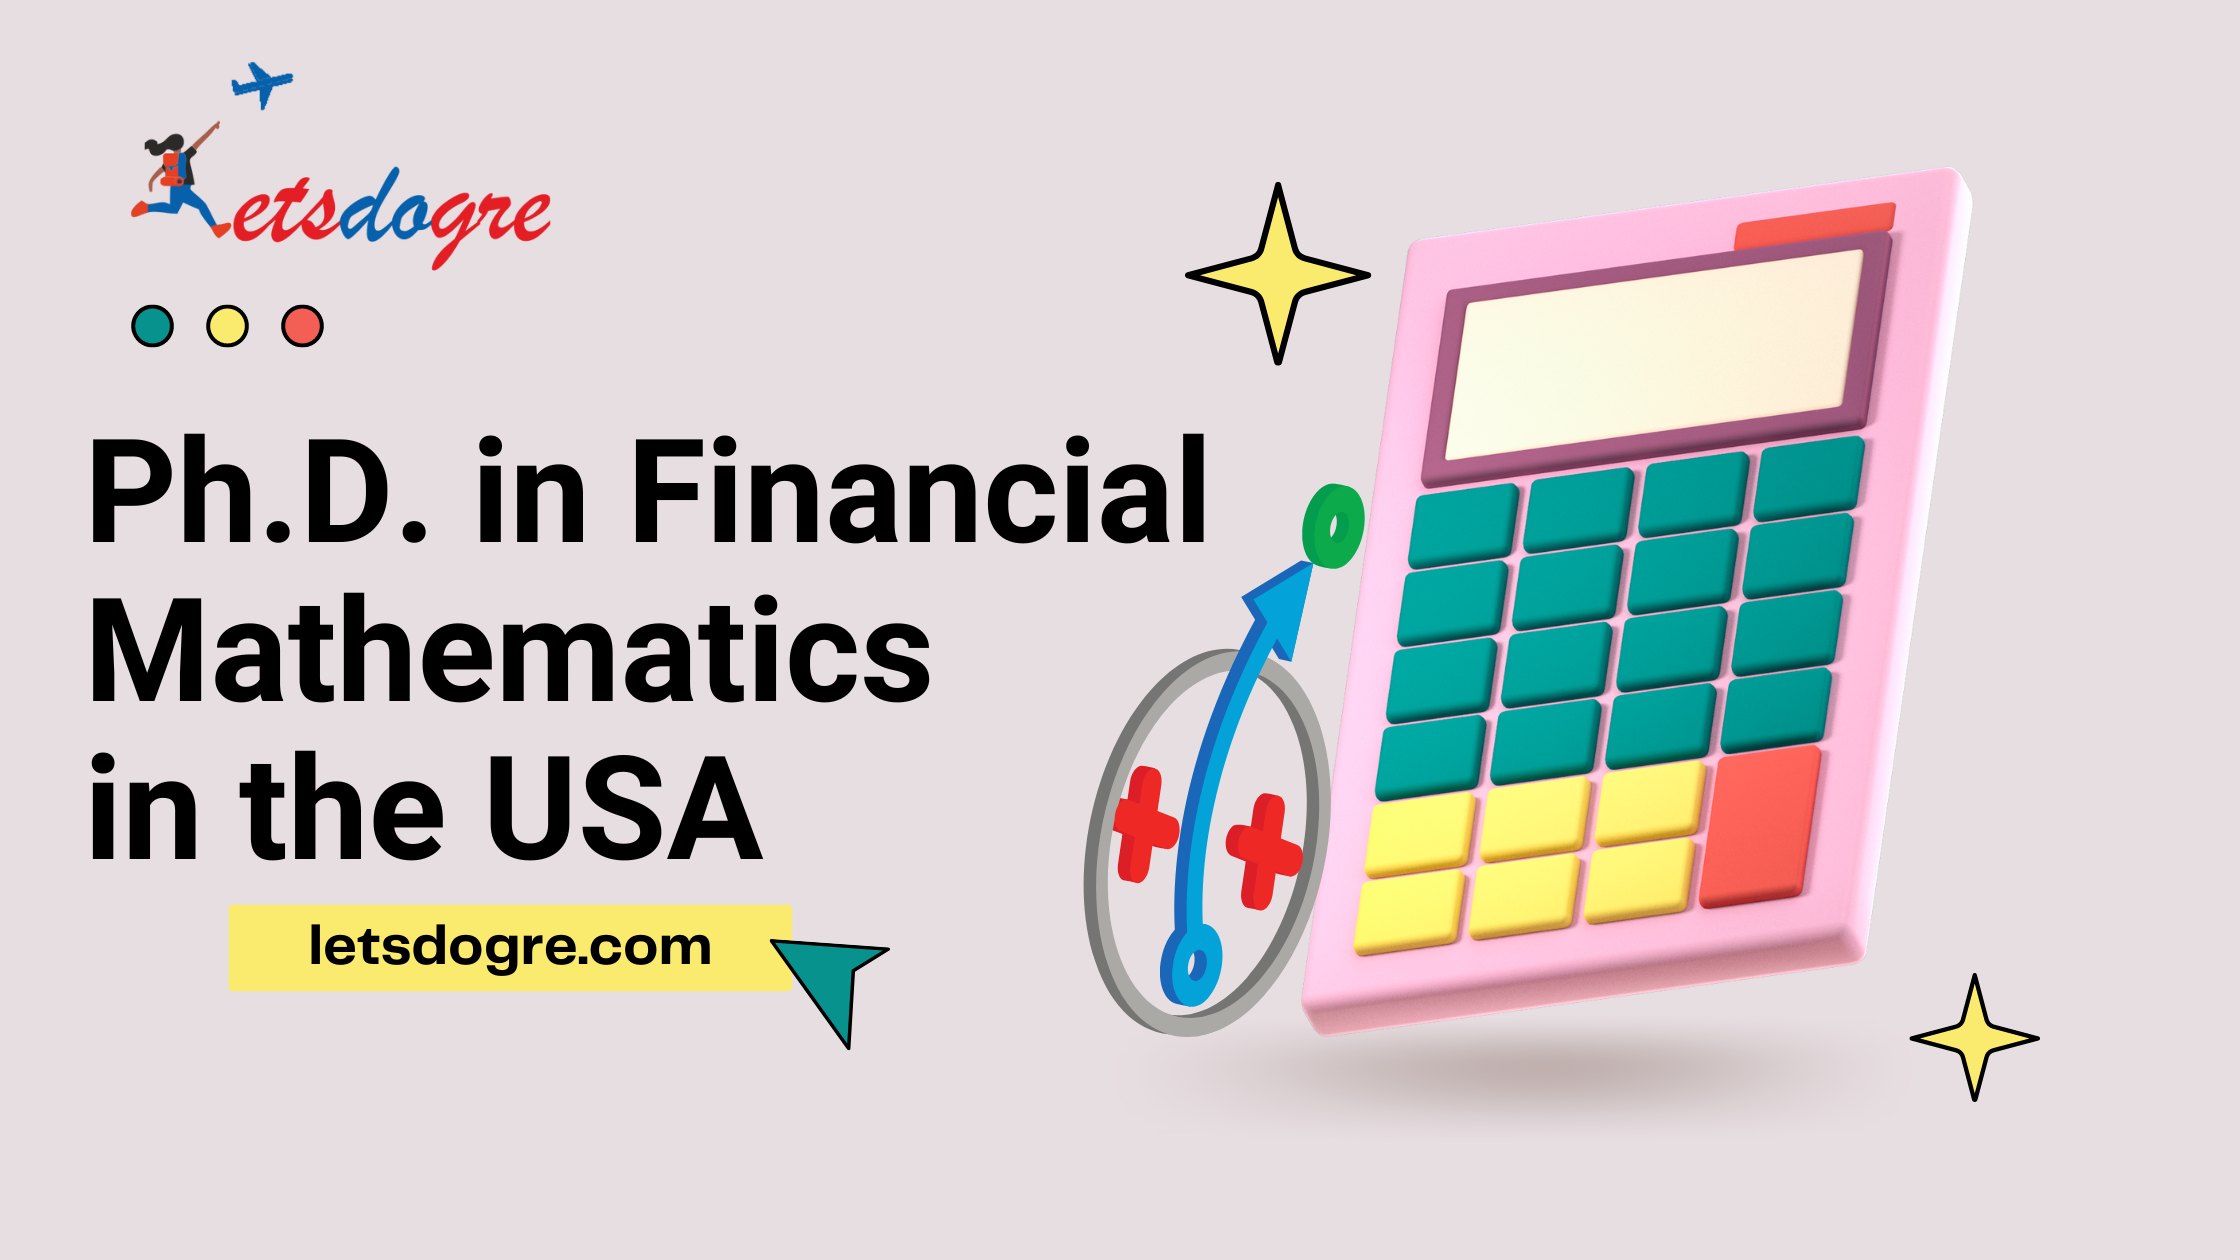 PhD in financial mathematics in the USA